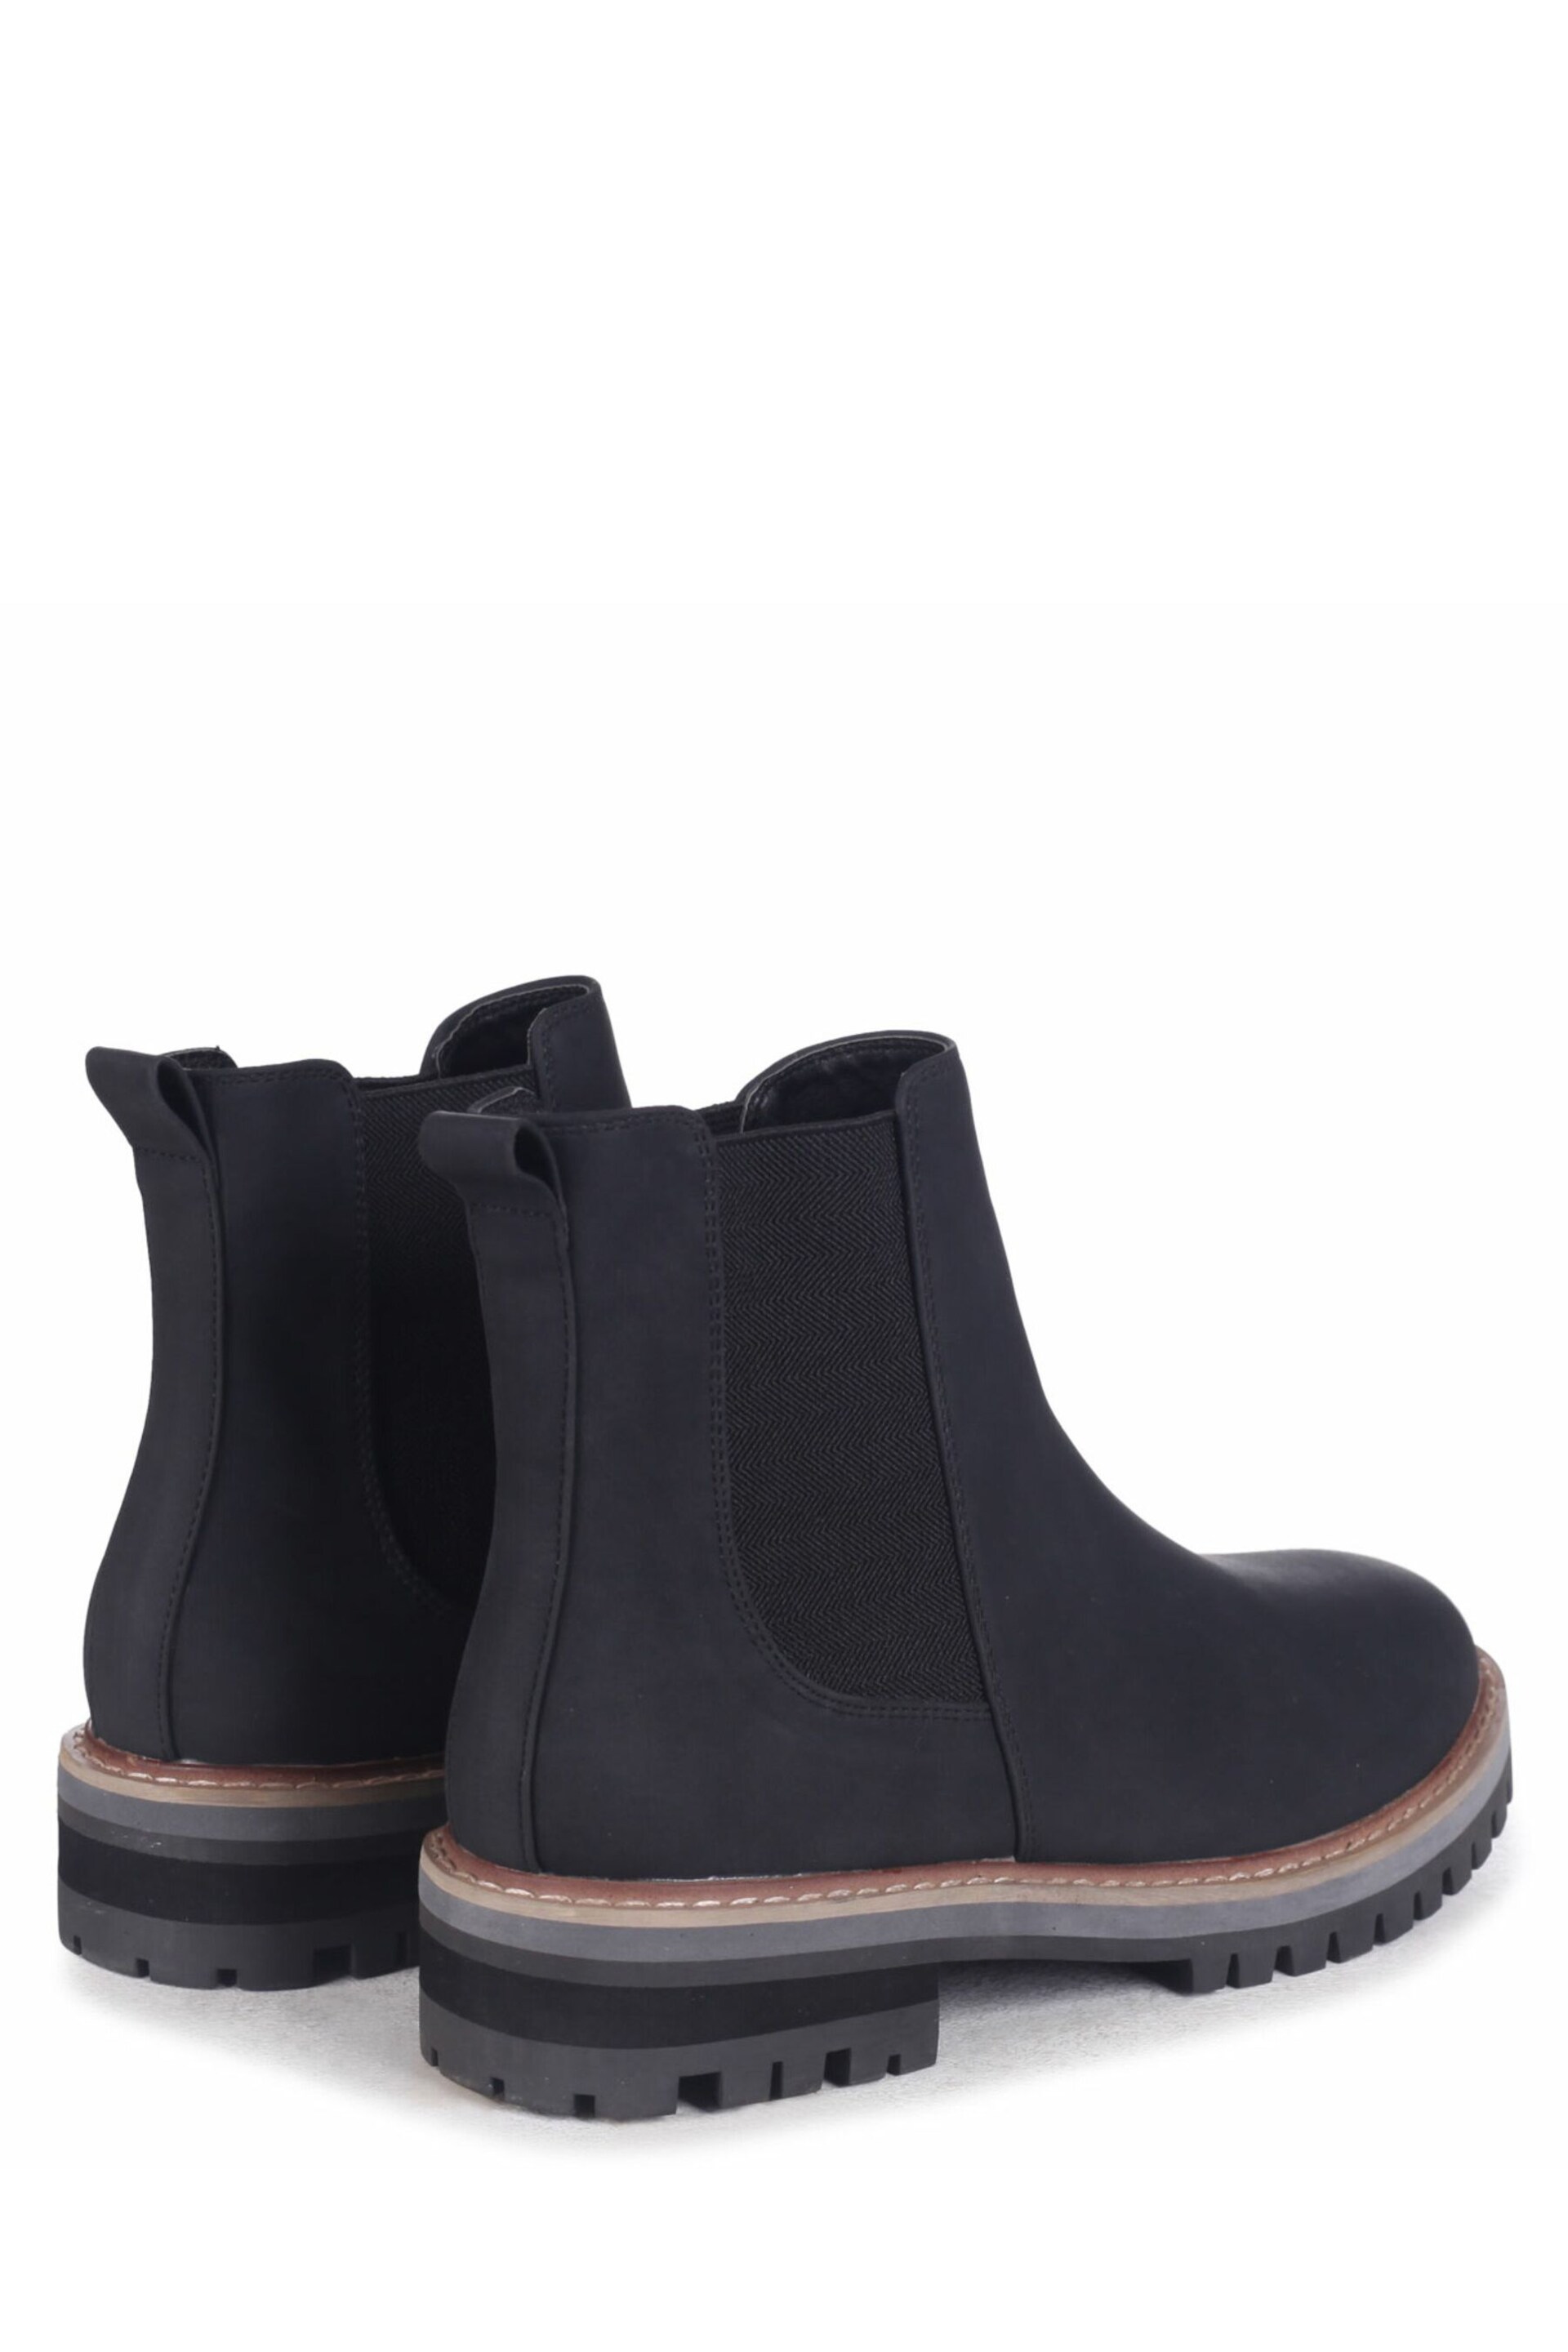 Linzi Black Classic Pull On Casual Chelsea Boots - Image 4 of 4